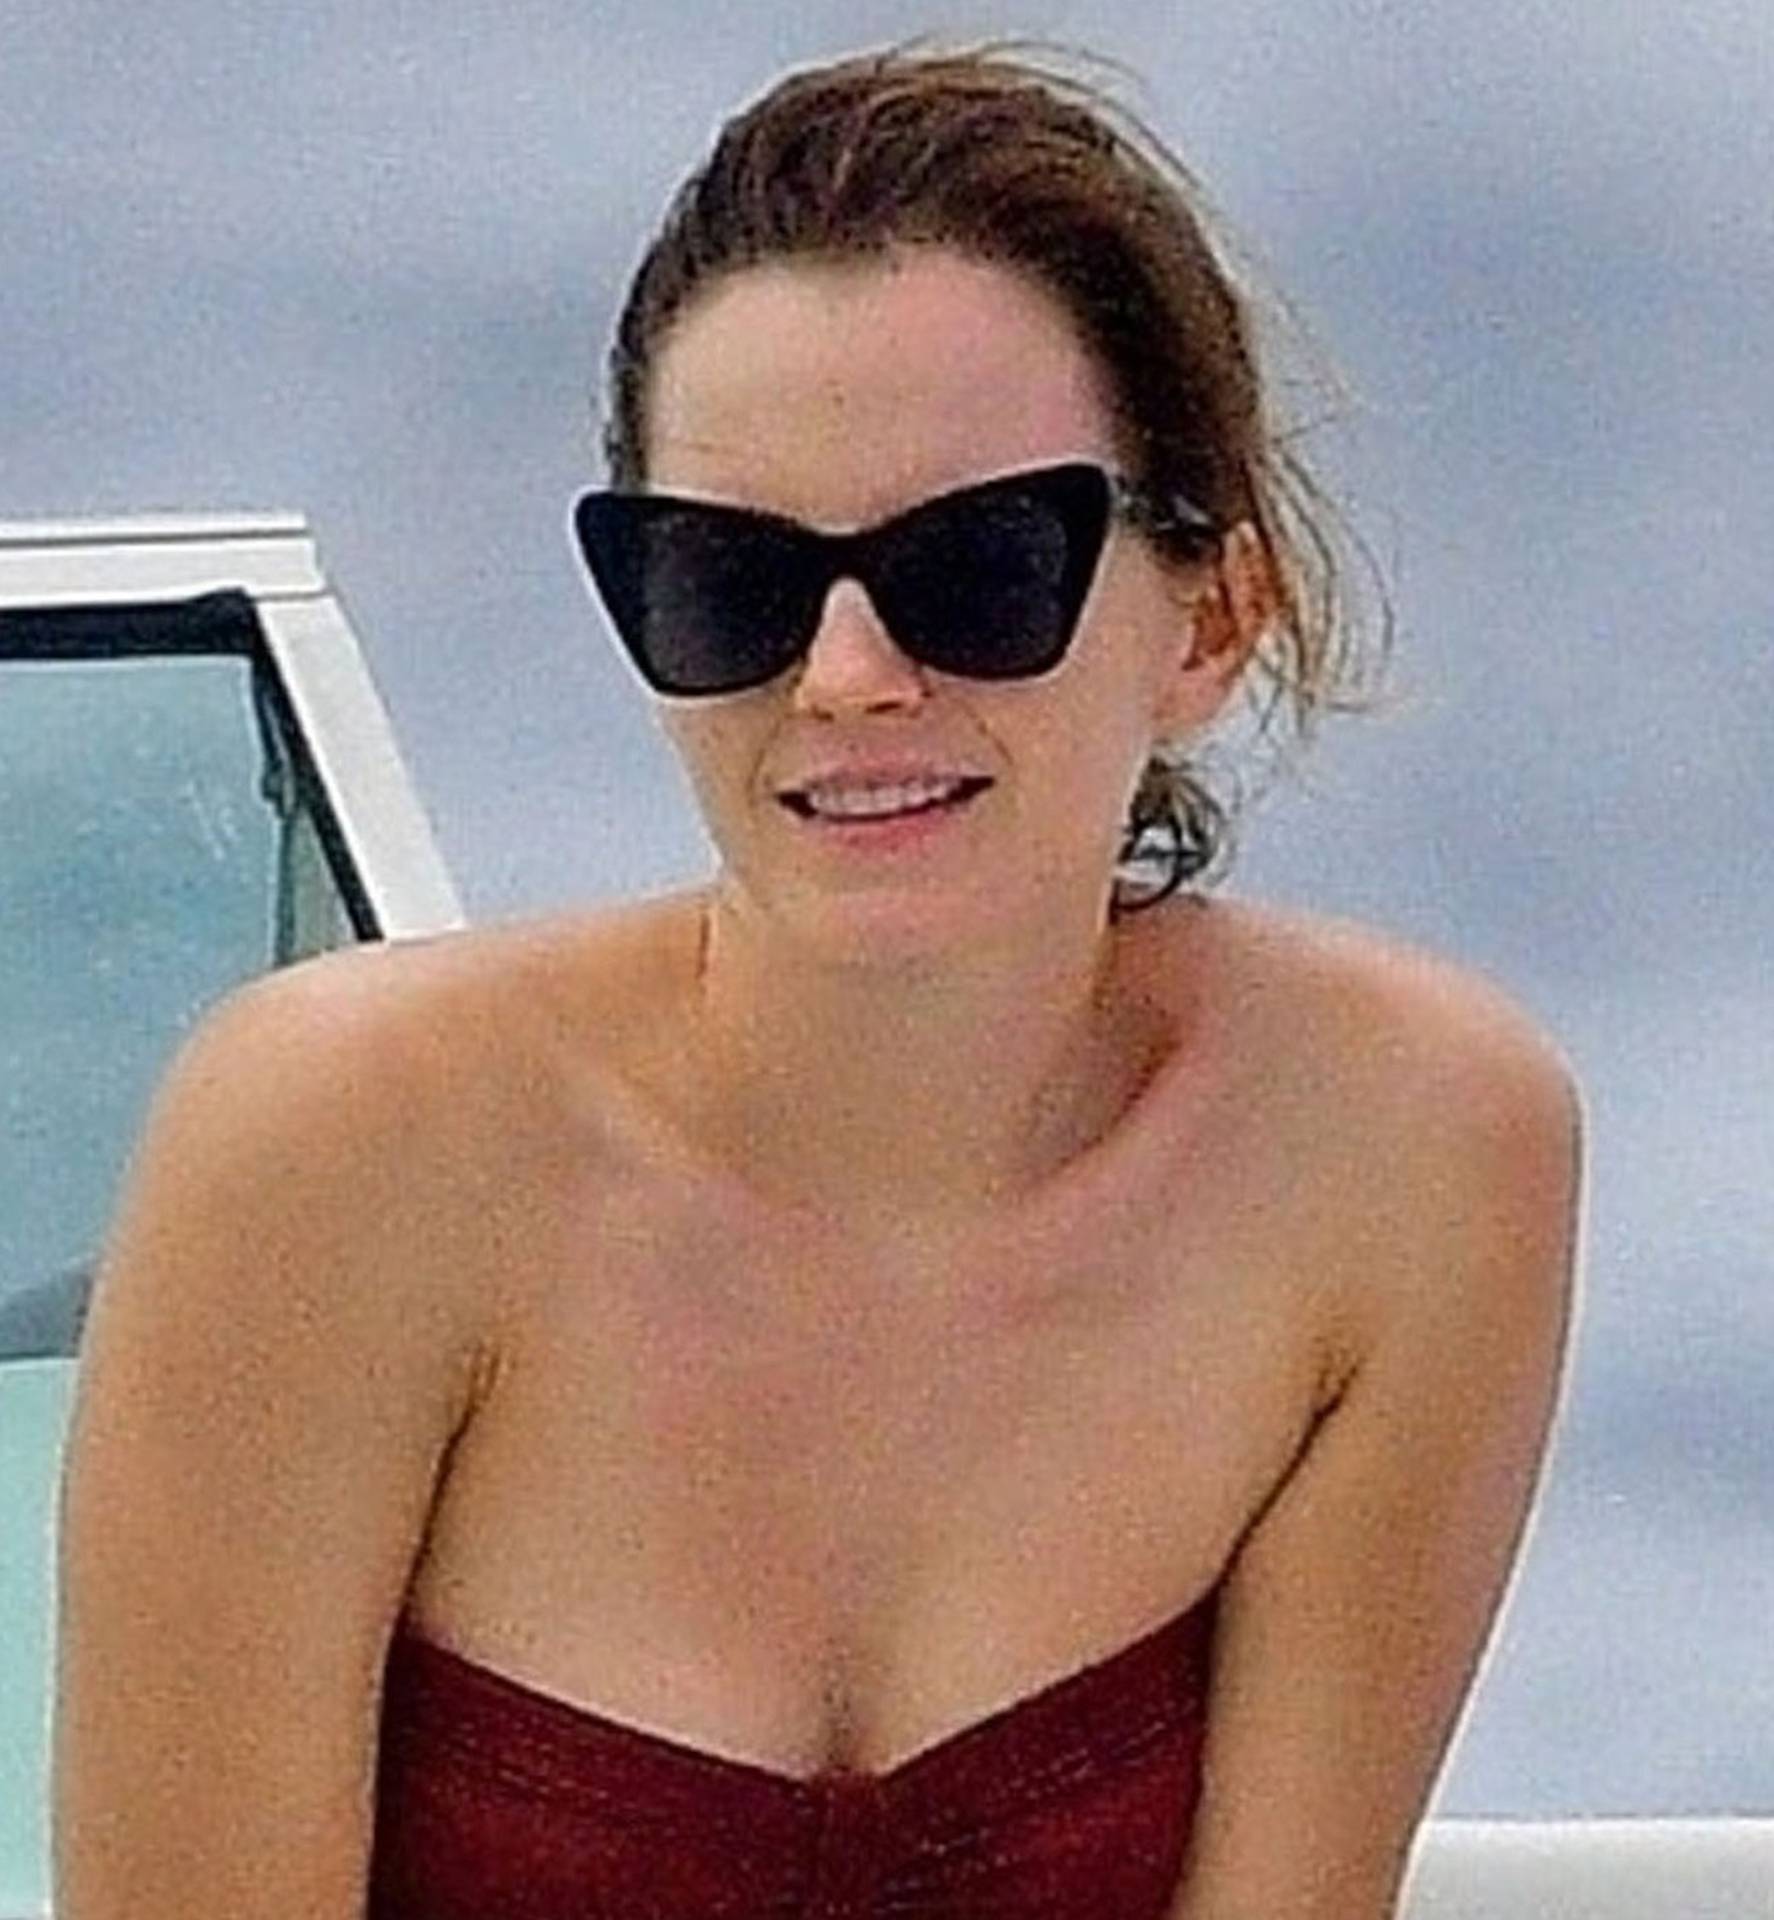 *PREMIUM-EXCLUSIVE* *MUST CALL FOR PRICING* Harry Potter star Emma Watson shows off her magical sizzling bikini-clad body as the actress hits the beach on her sun-soaked holiday in Barbados.